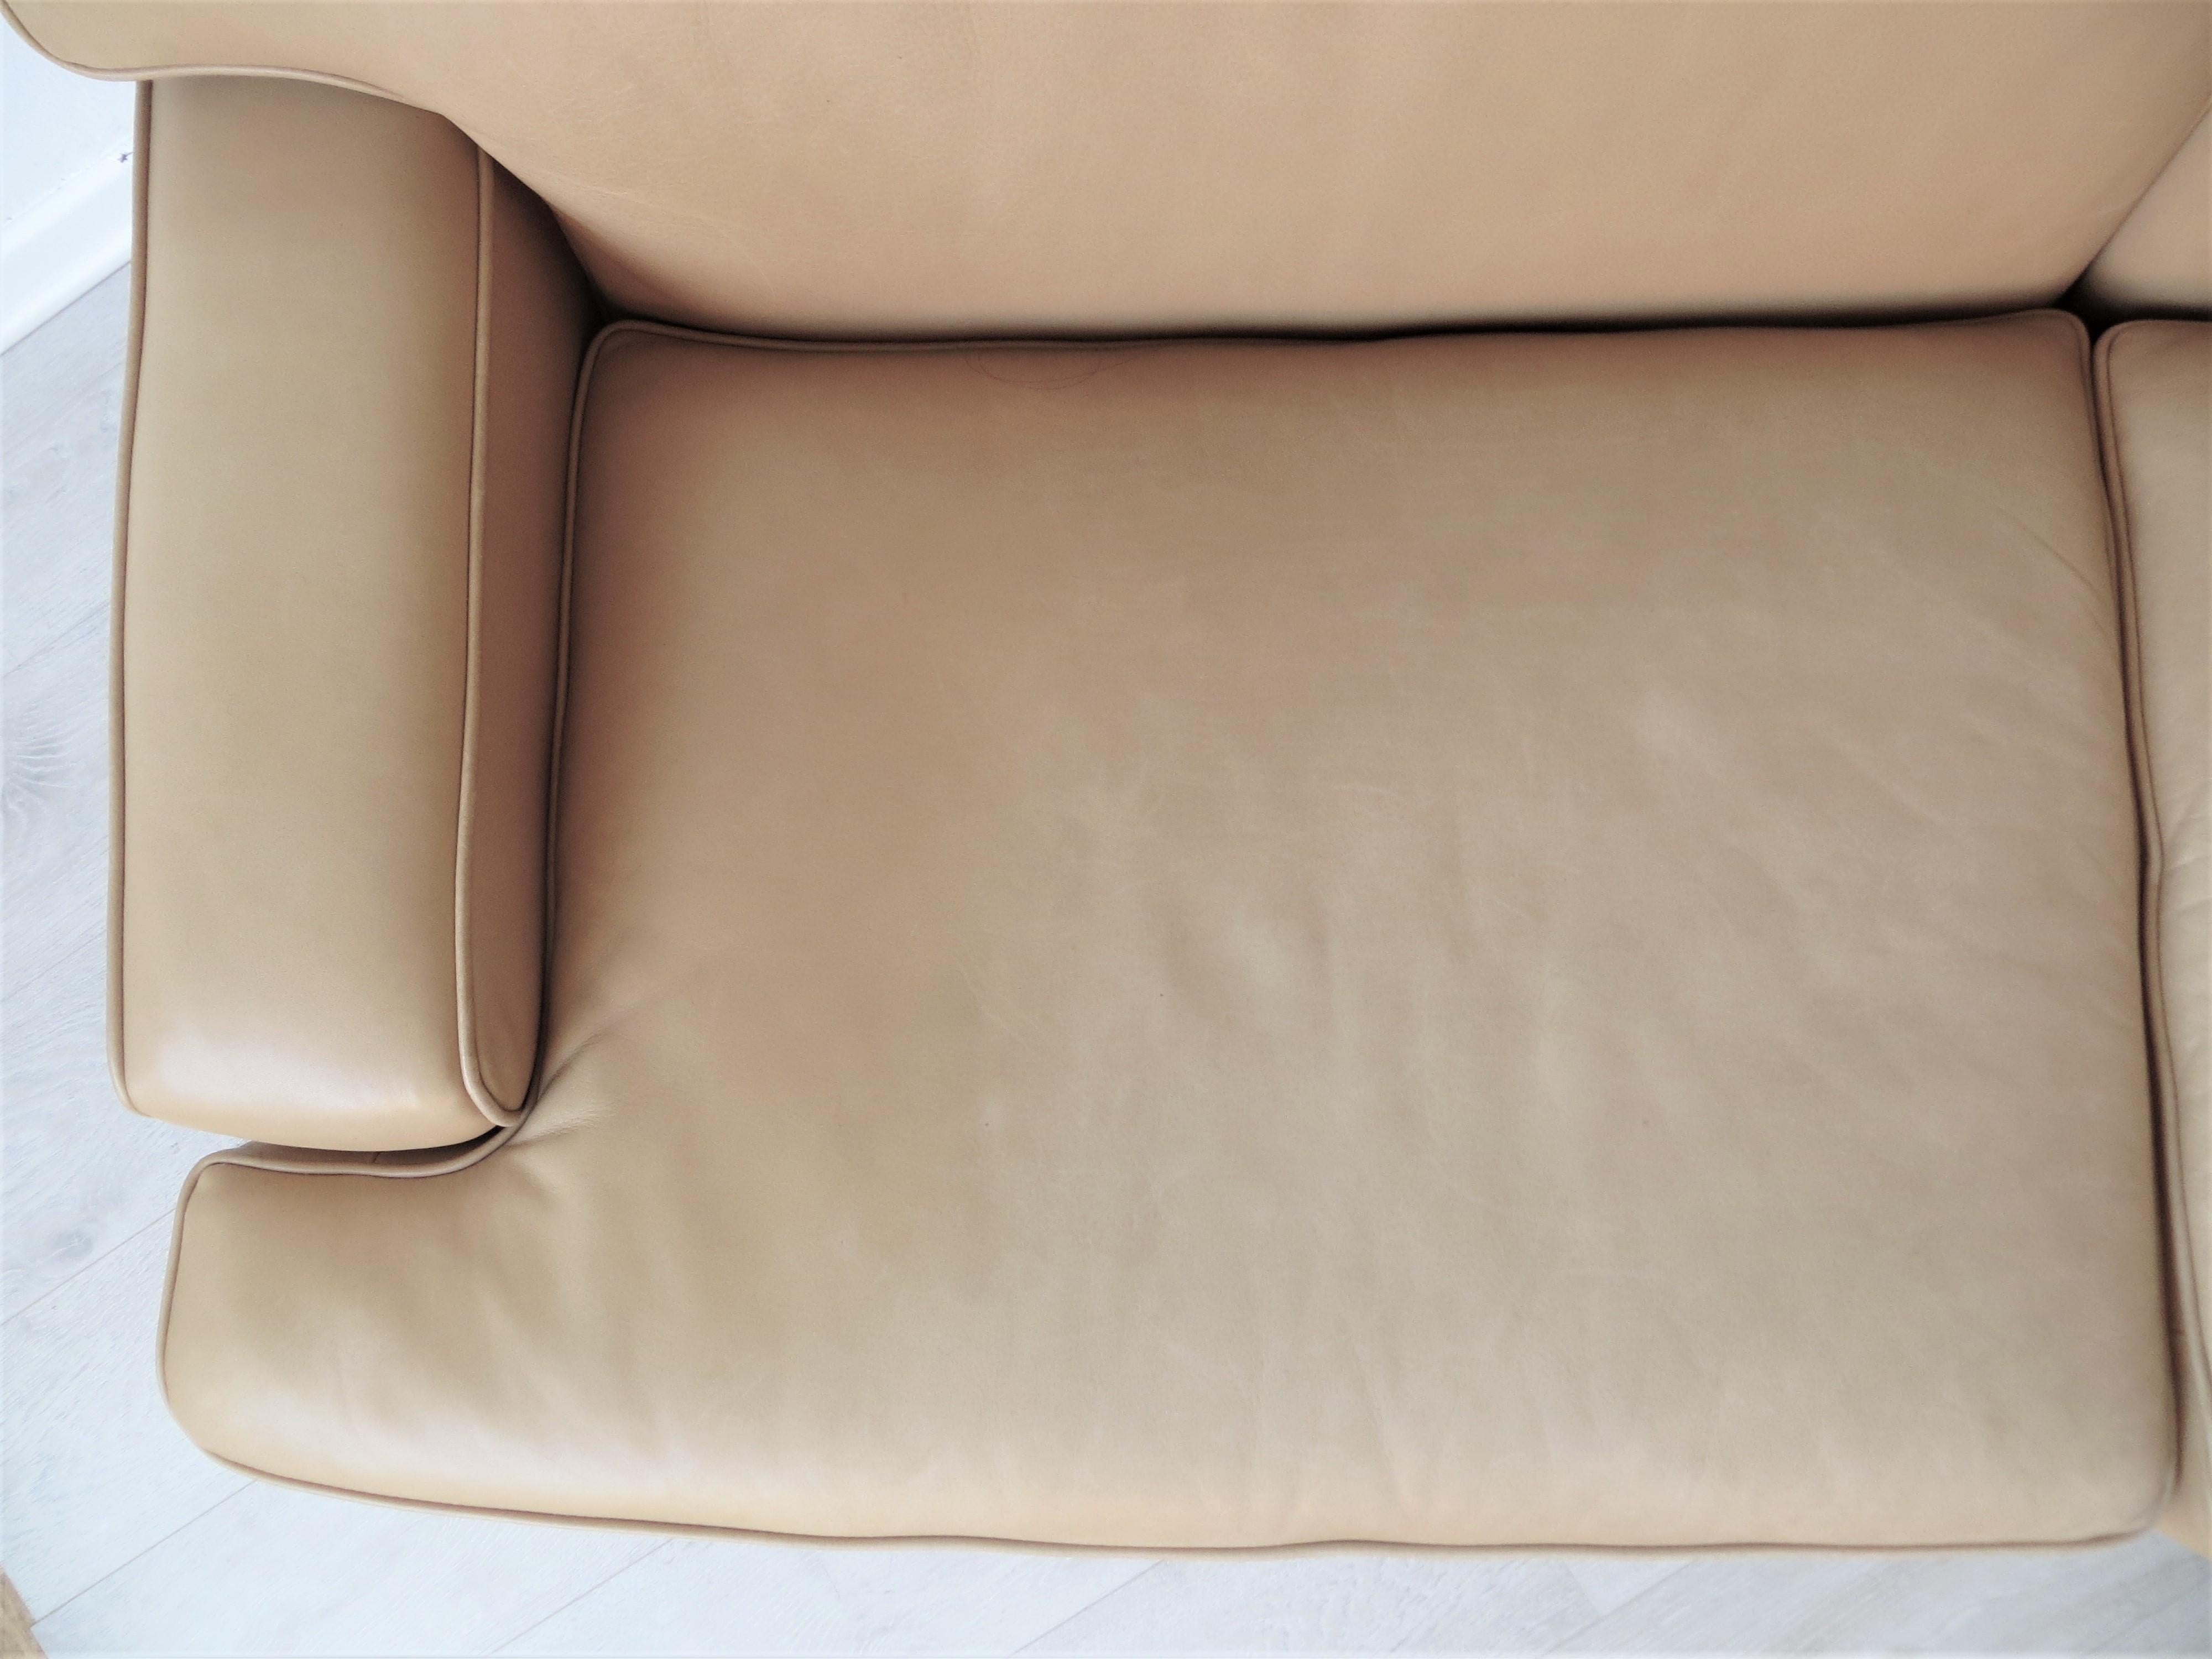 Arne Norell Vintage Leather Merkur Sofa Loveseat in Butterscotch Brown , 1960s For Sale 4